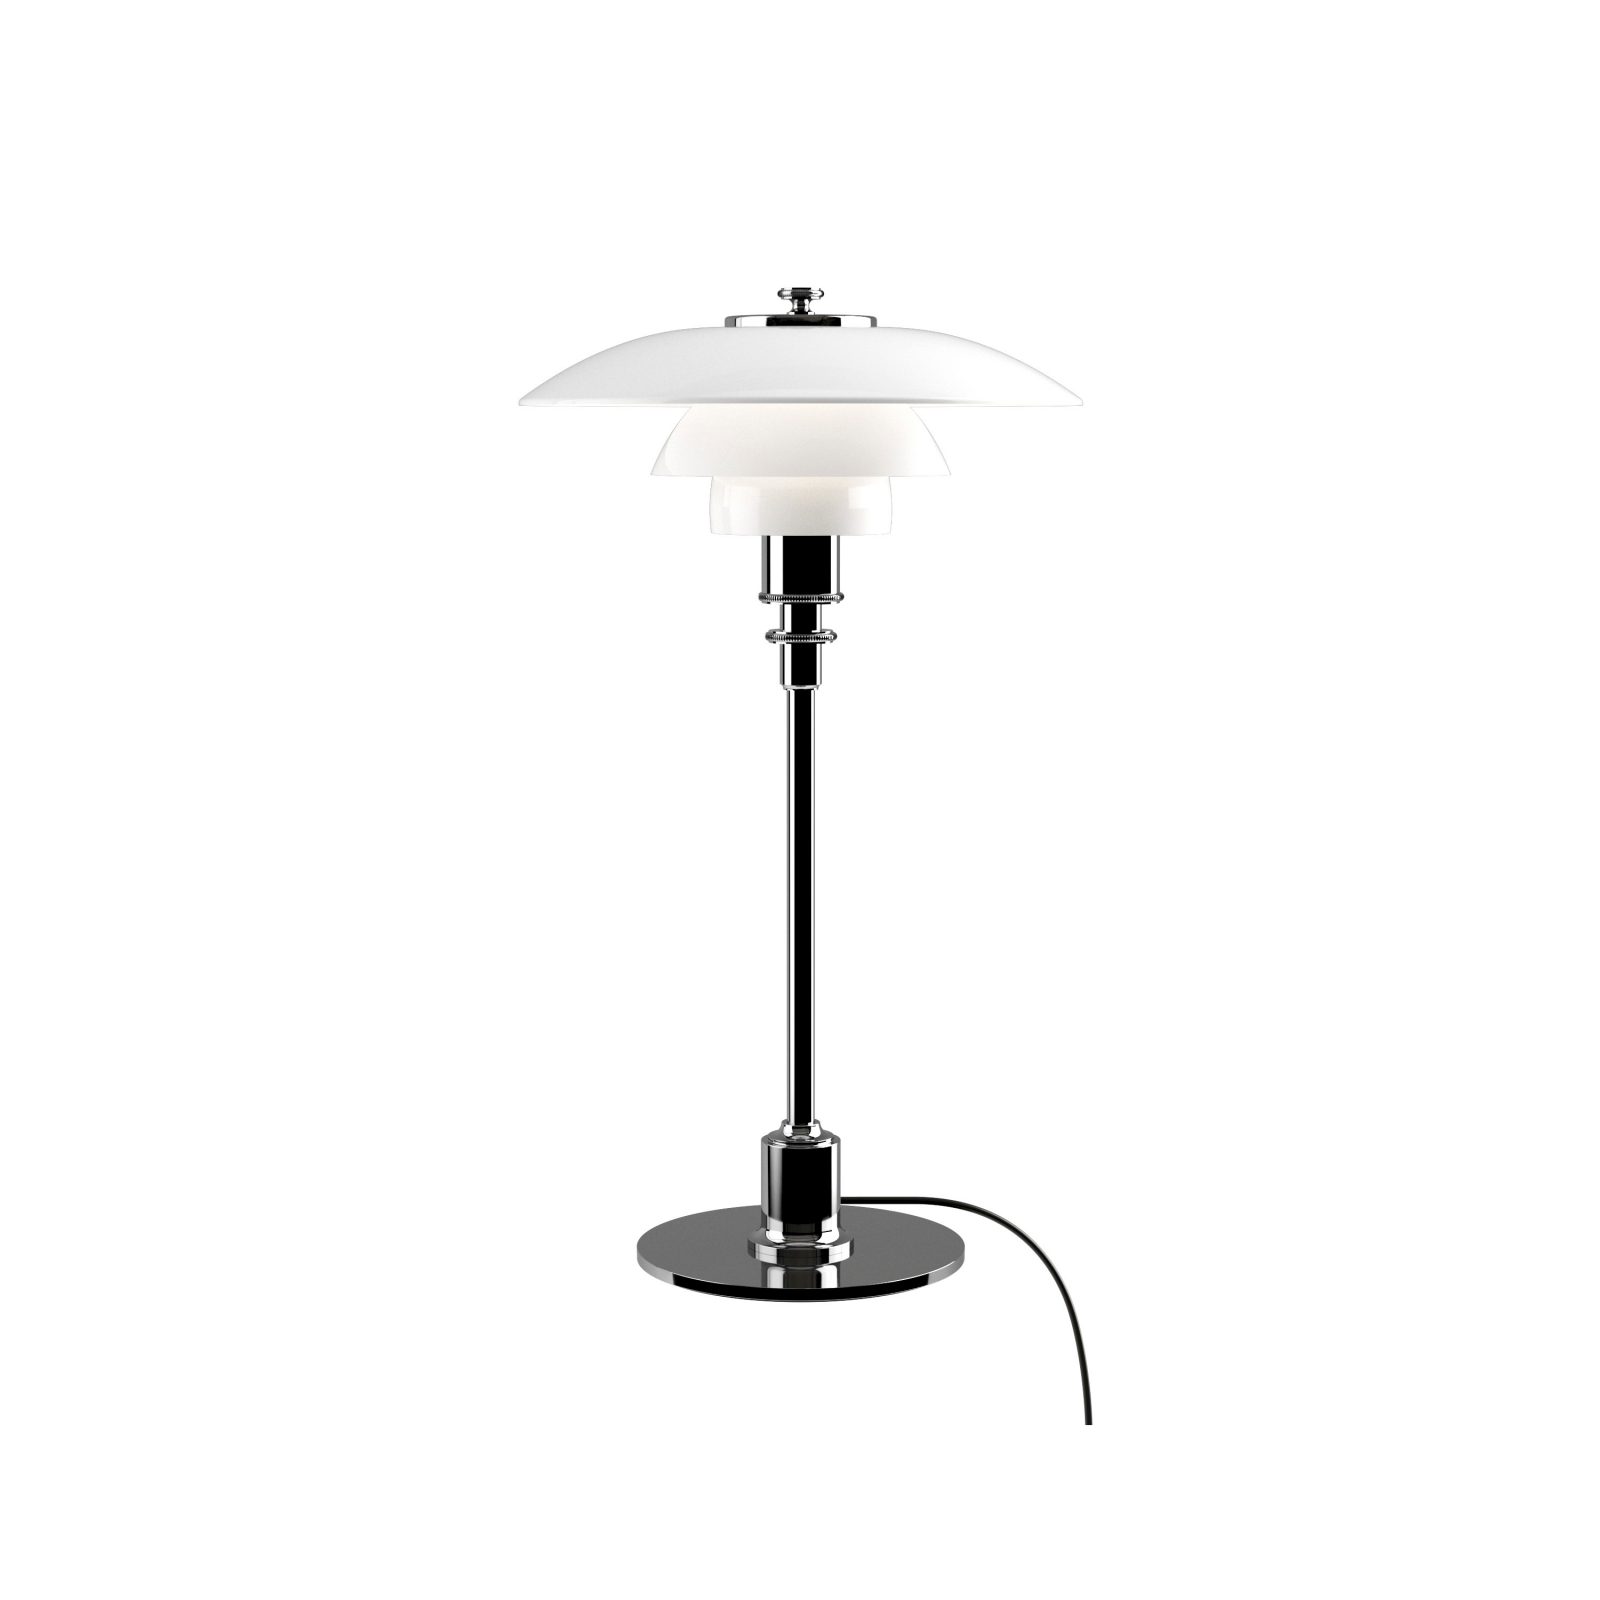 Louis Poulsen Ph 2 1 Table Lamp Now Available At Nordic Urban In